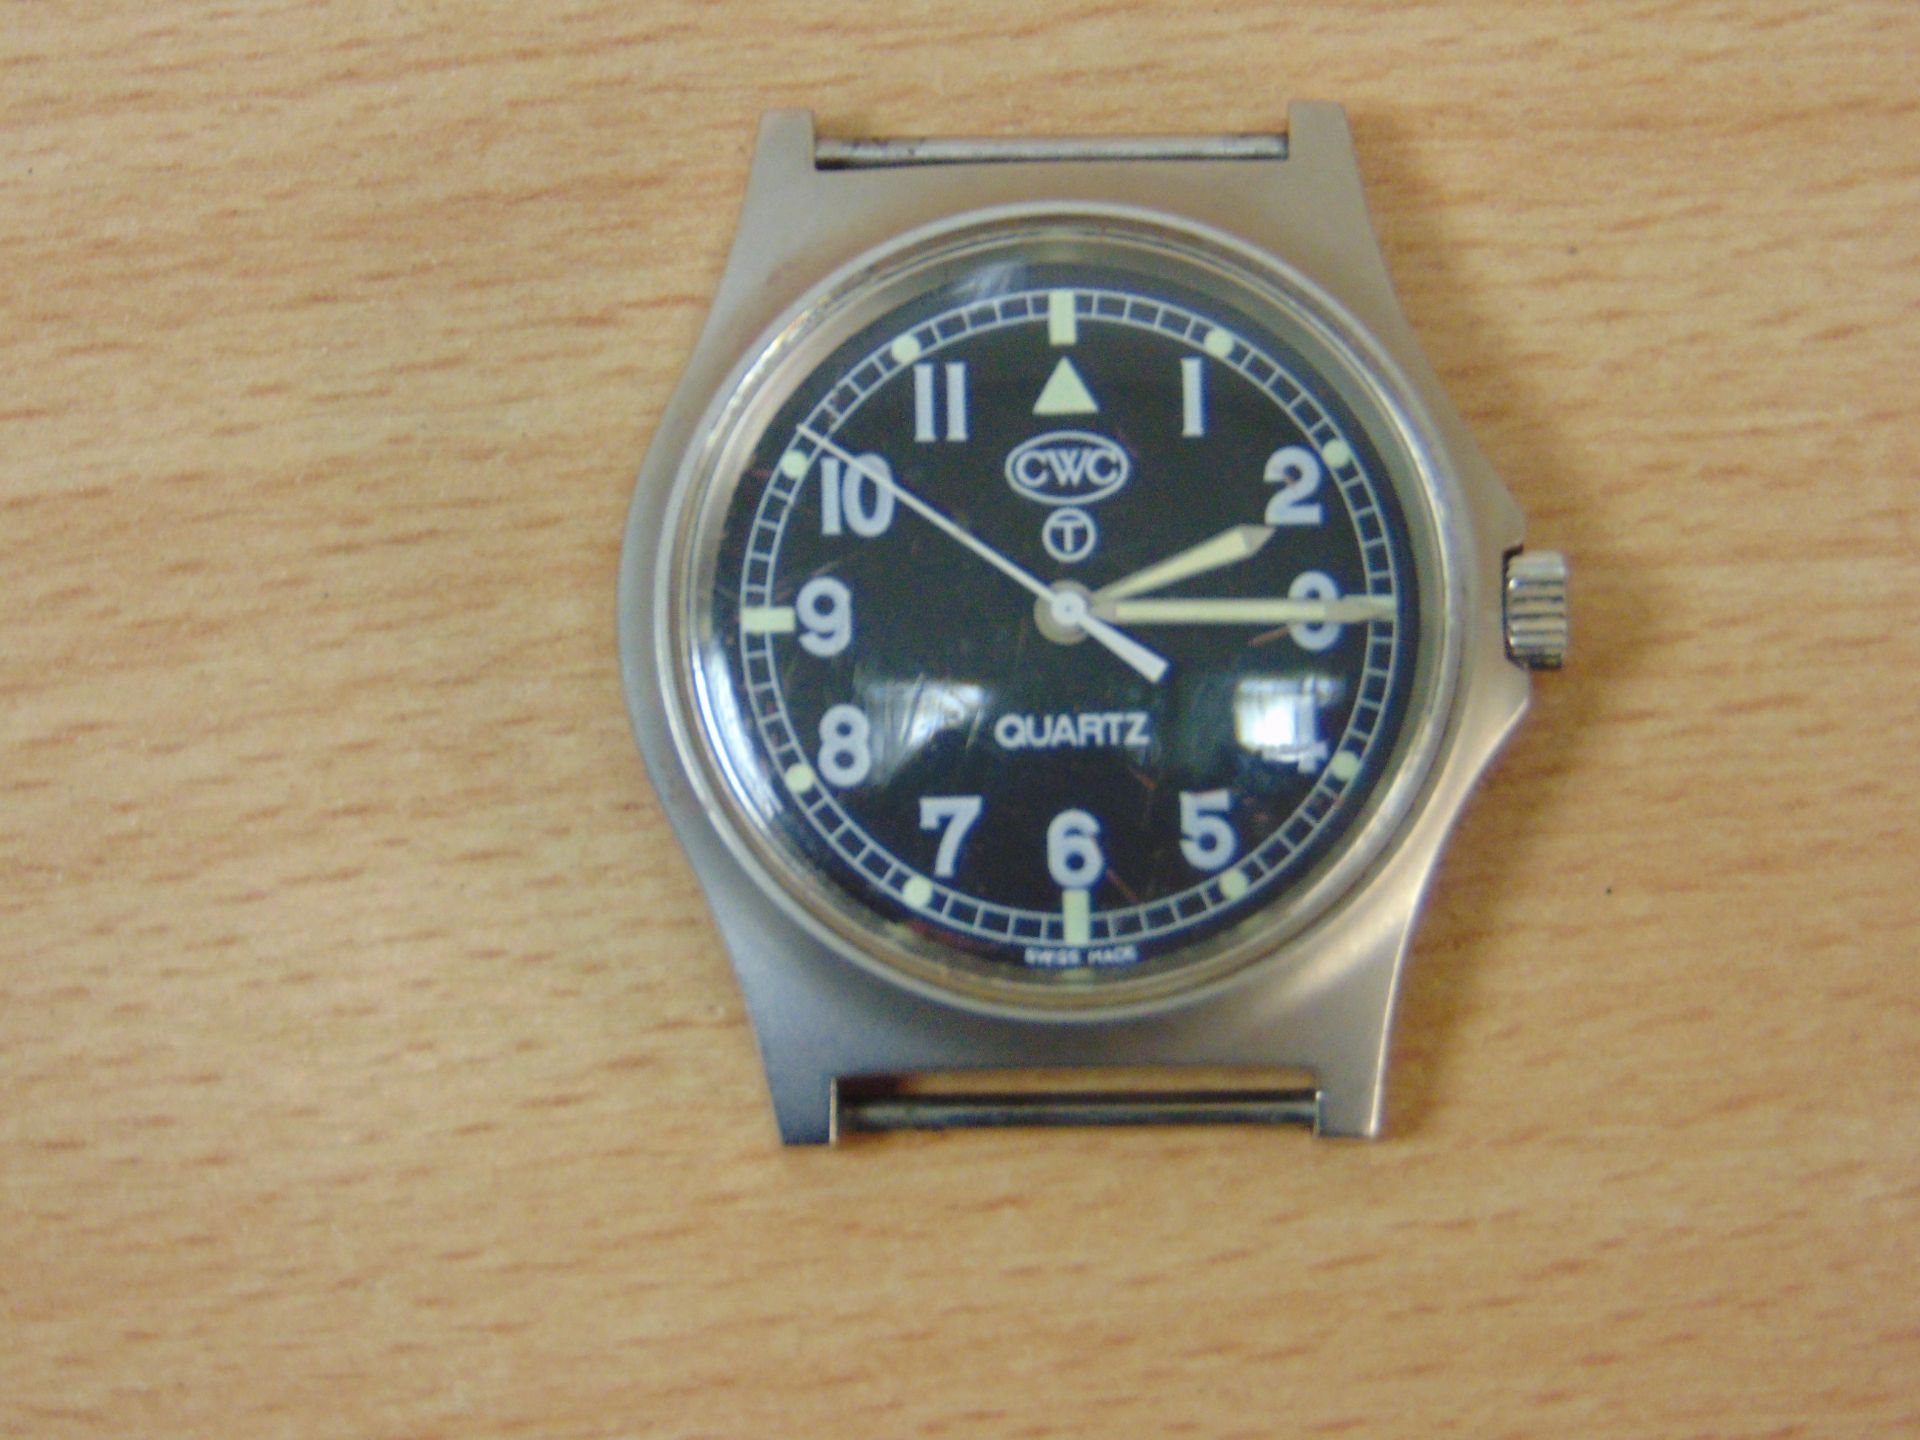 VERY RARE 0552 CWC ROYAL MARINES ISSUE SERVICE WATCH DATE 1989 (GULF WAR) - Image 3 of 9